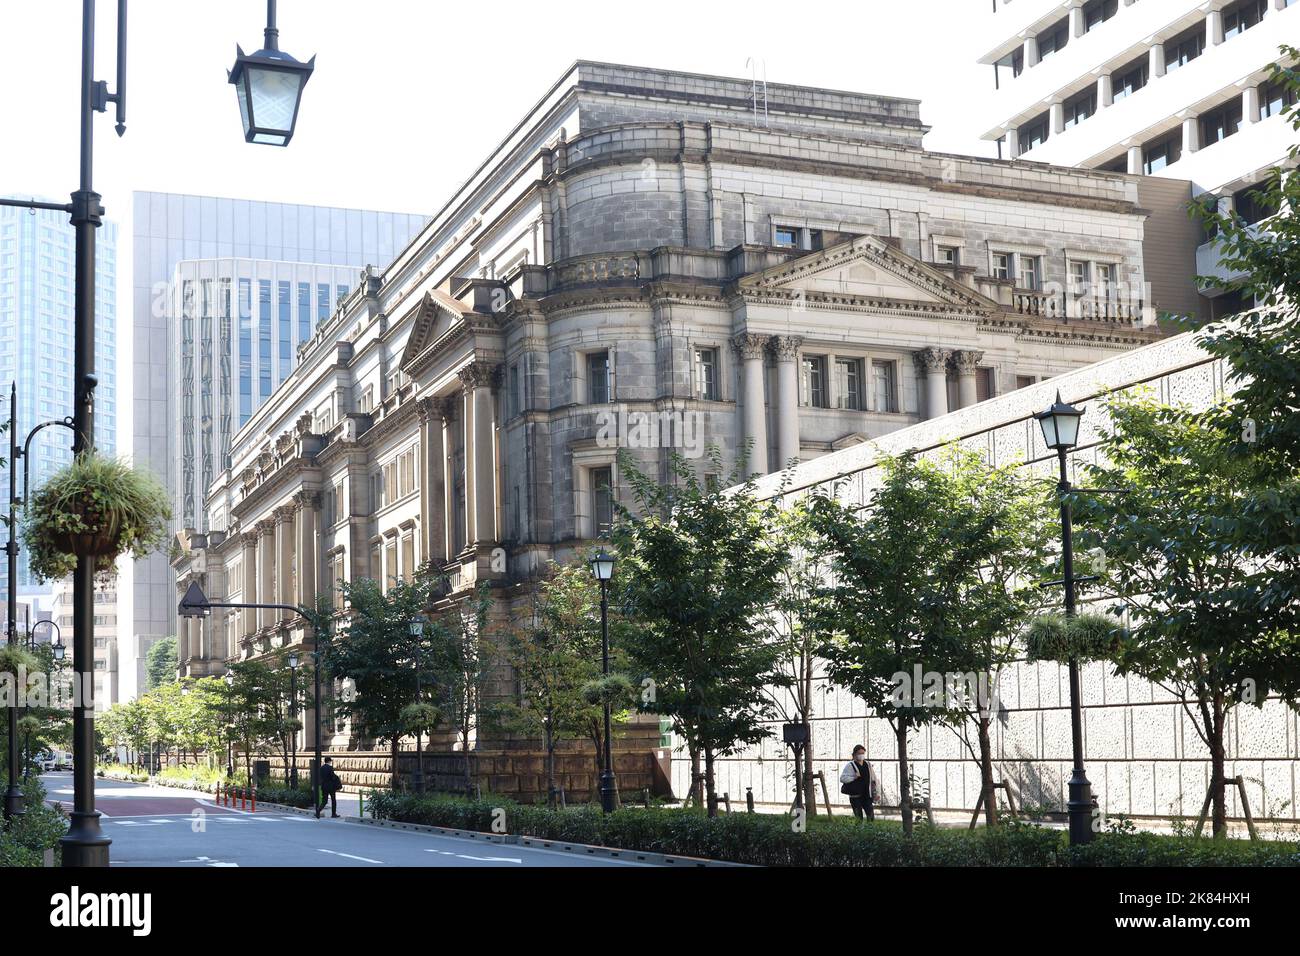 Tokyo, Japan. 21st Oct, 2022. This picture shows Bank of Japan head office in Tokyo on Friday, October 21, 2022. Japanese yen weakened in the lower 150 yen range against the U.S. dollar as the interest rate gap widens between Bank of Japan and FRB in the U.S. Credit: Yoshio Tsunoda/AFLO/Alamy Live News Stock Photo